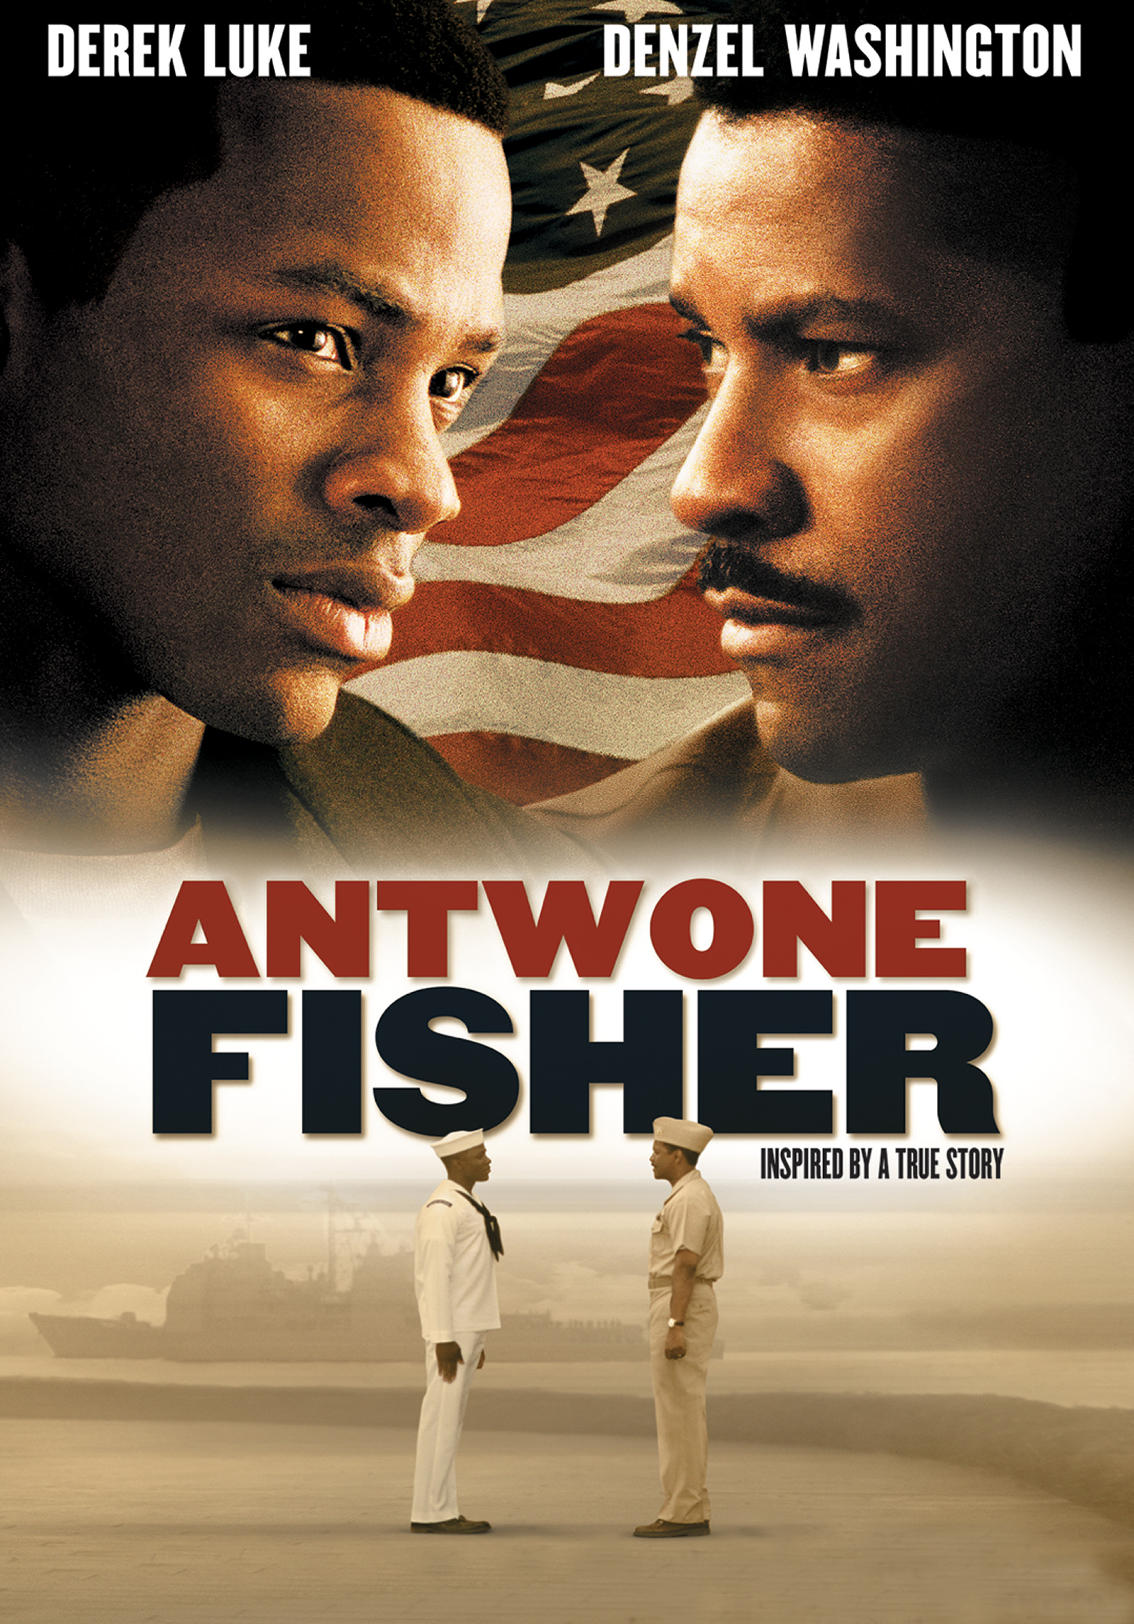 antwone fisher analysis